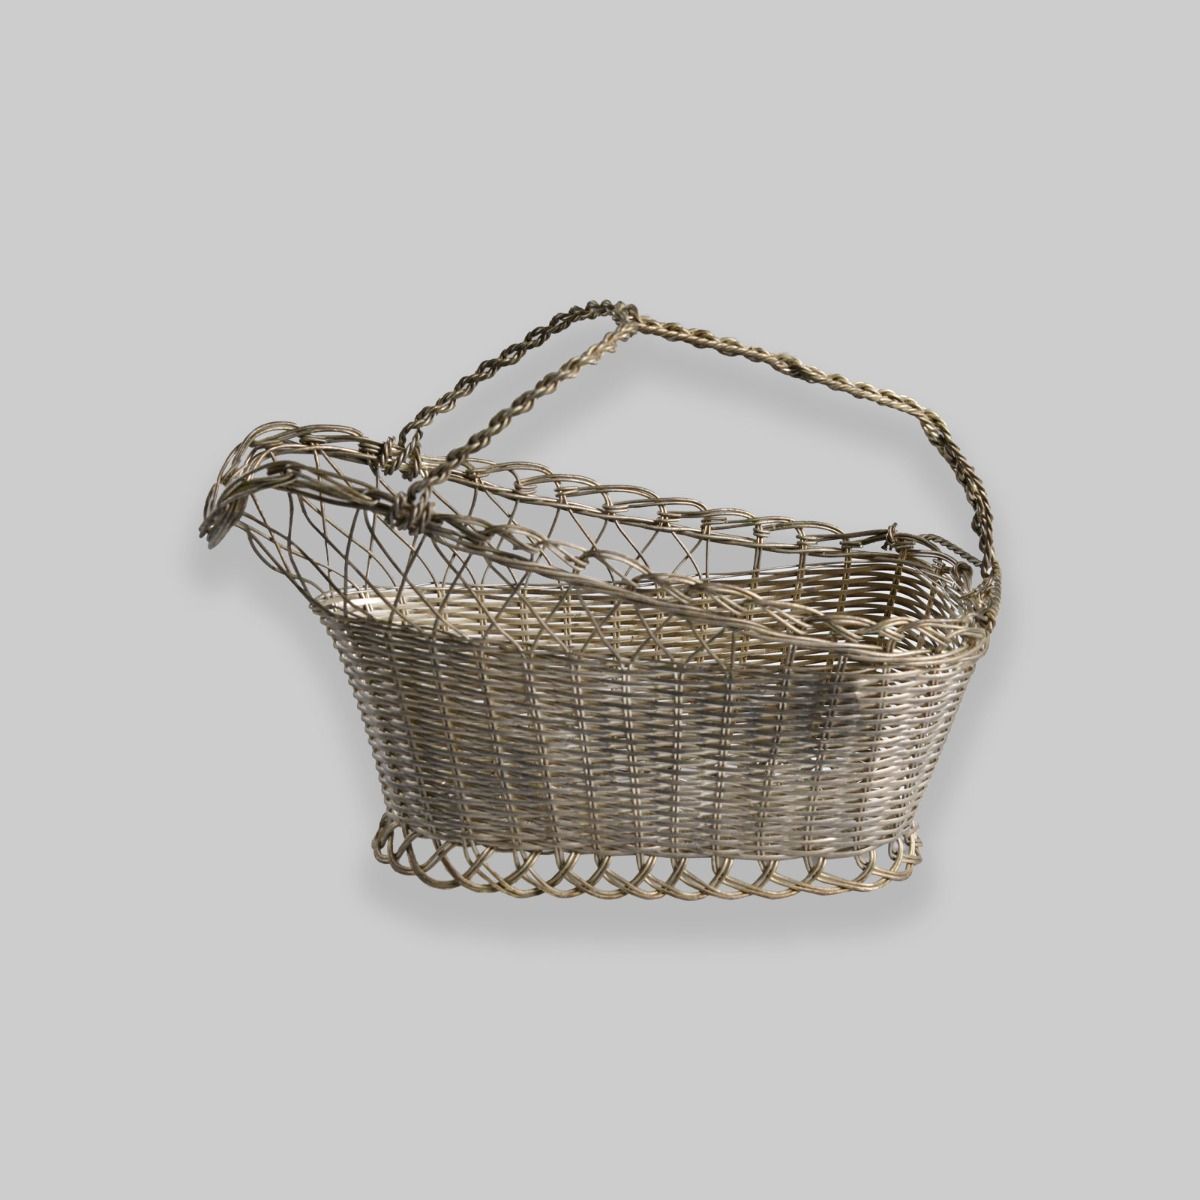 Vintage French Woven Wire Wine Bottle Holder